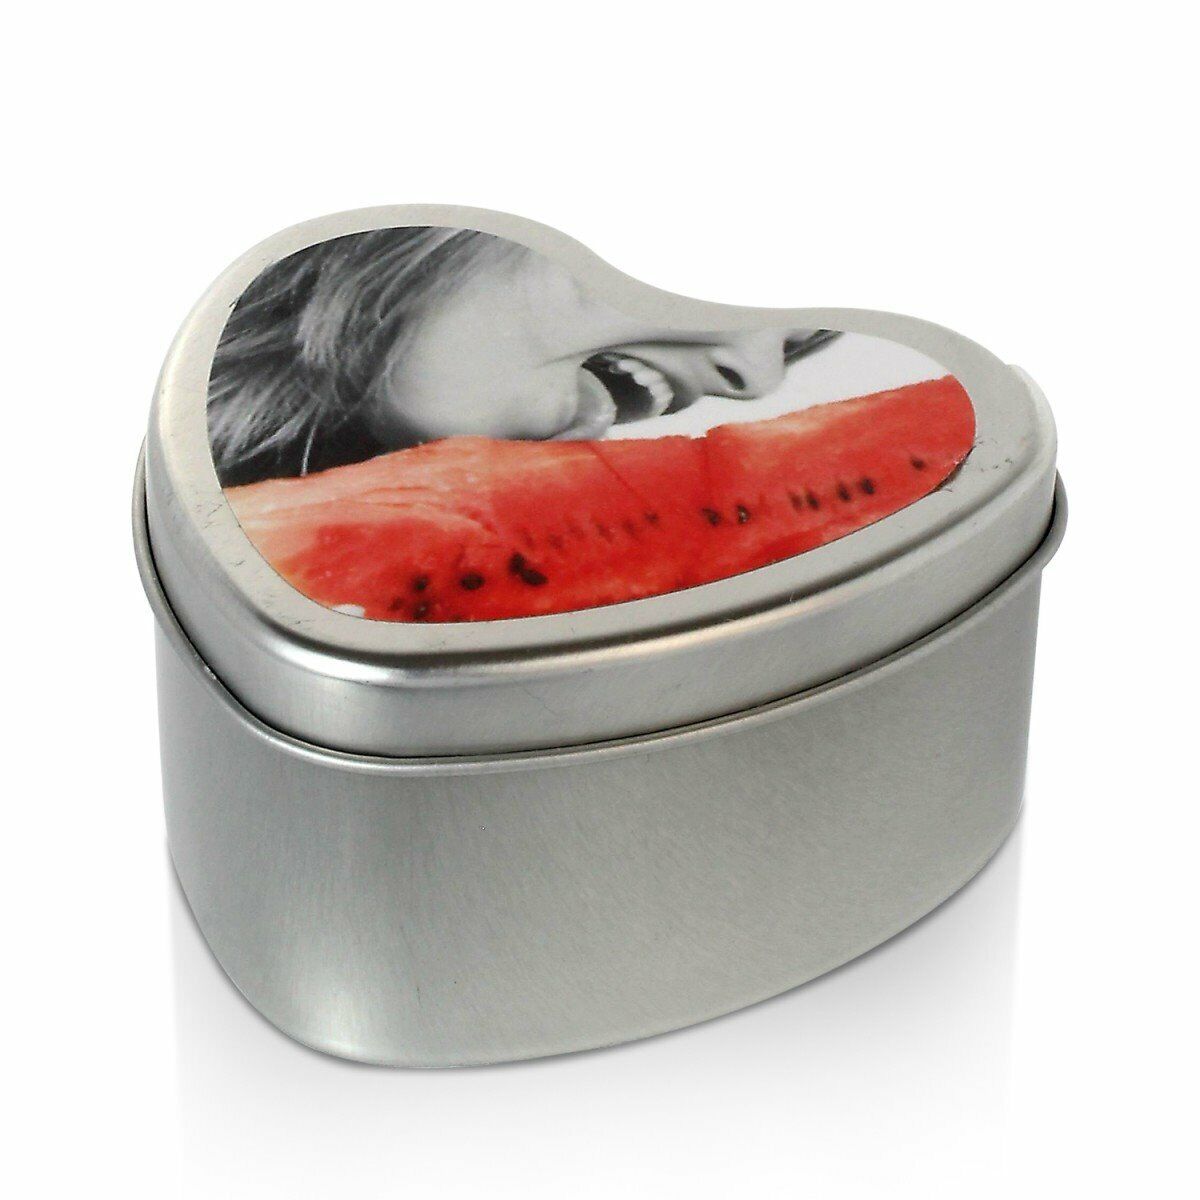 Earthly Body Edible Heart Massage Oil Candle Watermelon Flavored Scented 4.7oz